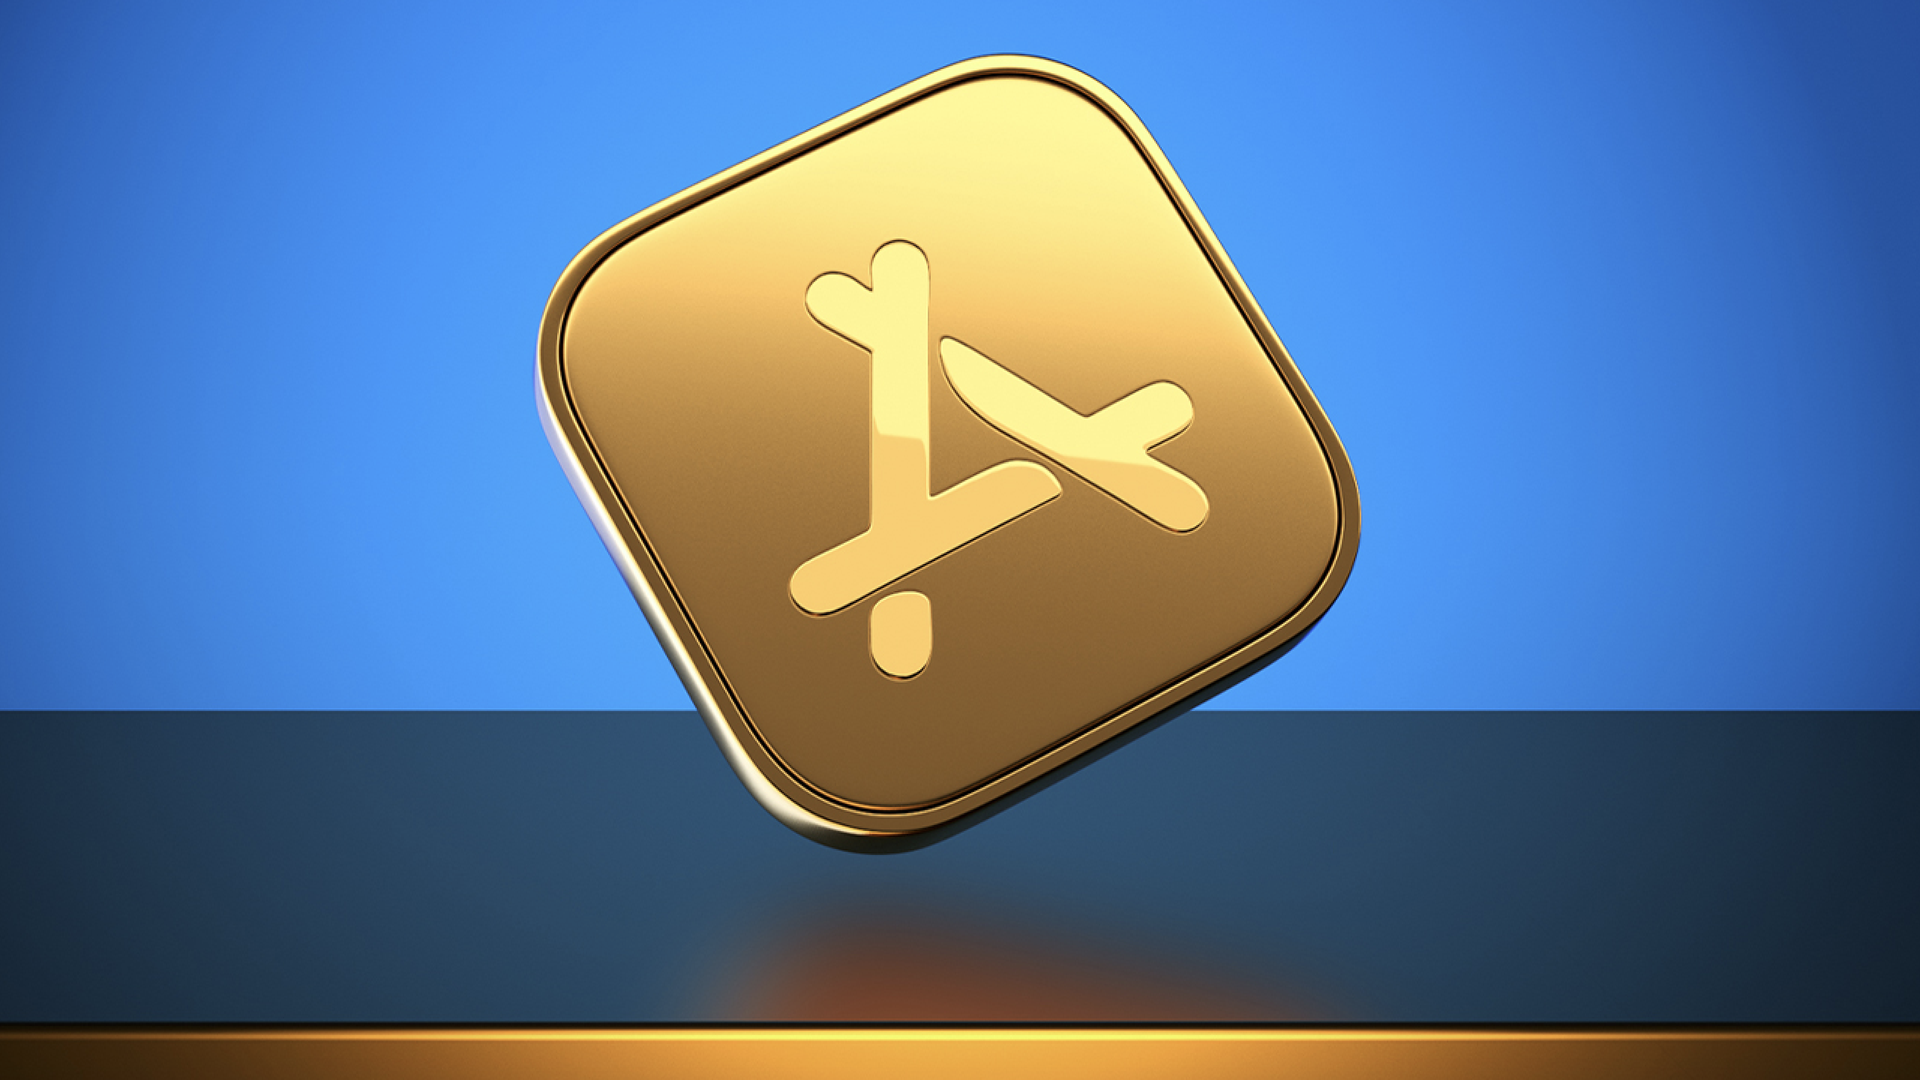 An illustration with Apple's App Store logo in gold.